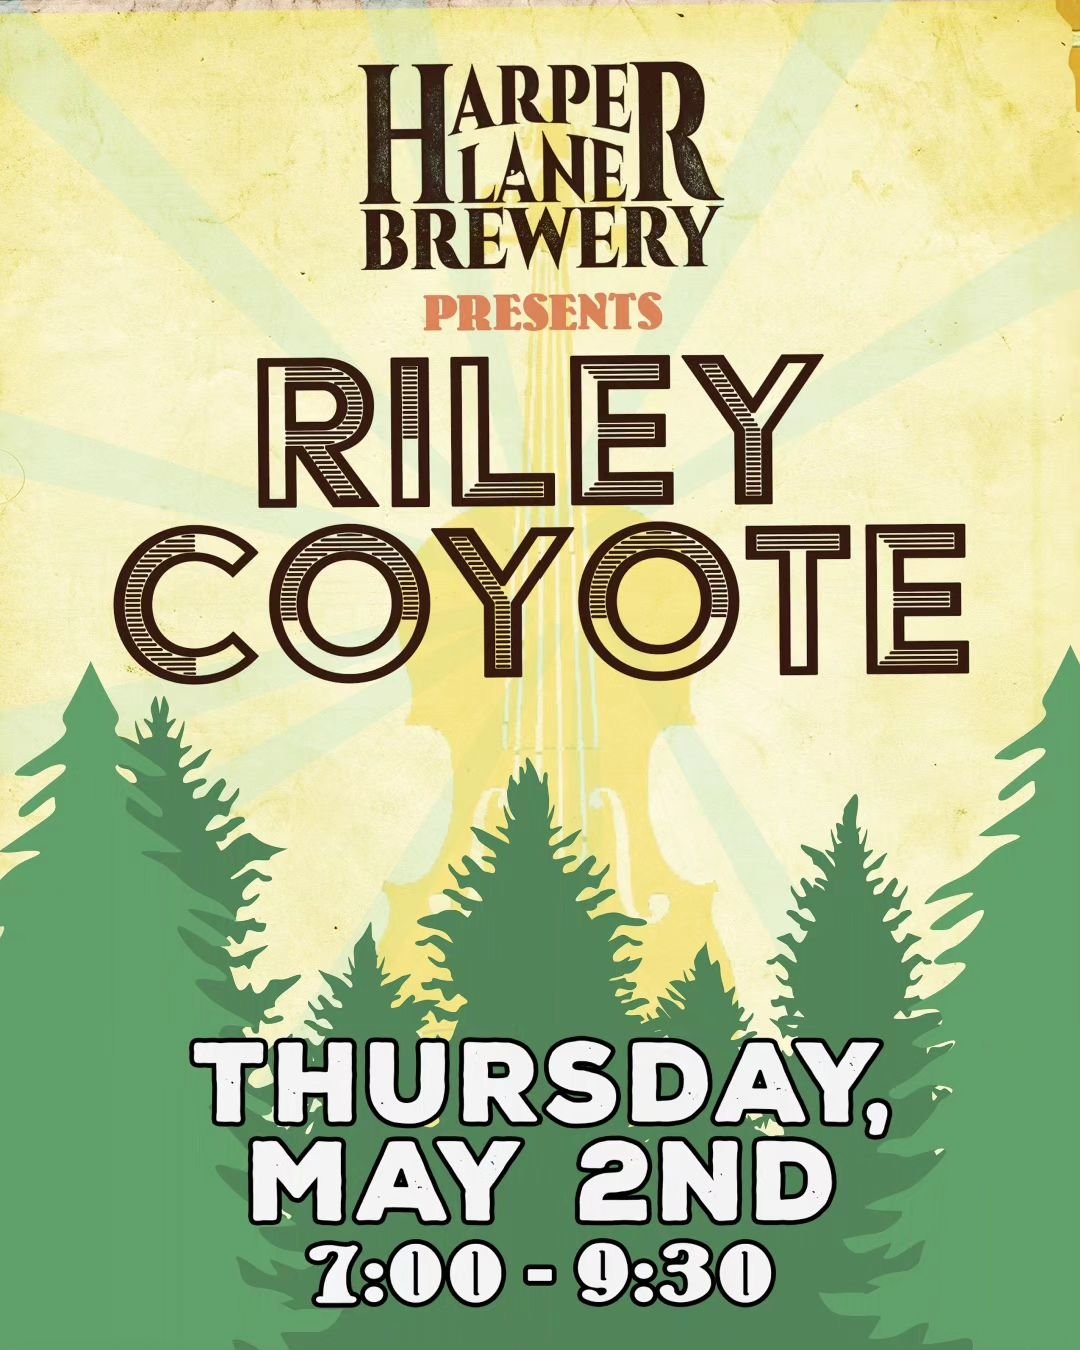 Let's think about Thursday night instead of how it's sunday night... 

First live band at the taproom this Thursday!!! Our friends Riley Coyote will be playing! Save the date!

#savethedate #rileycoyote #harperlanebrewery
#livemusic #taproom #middleb